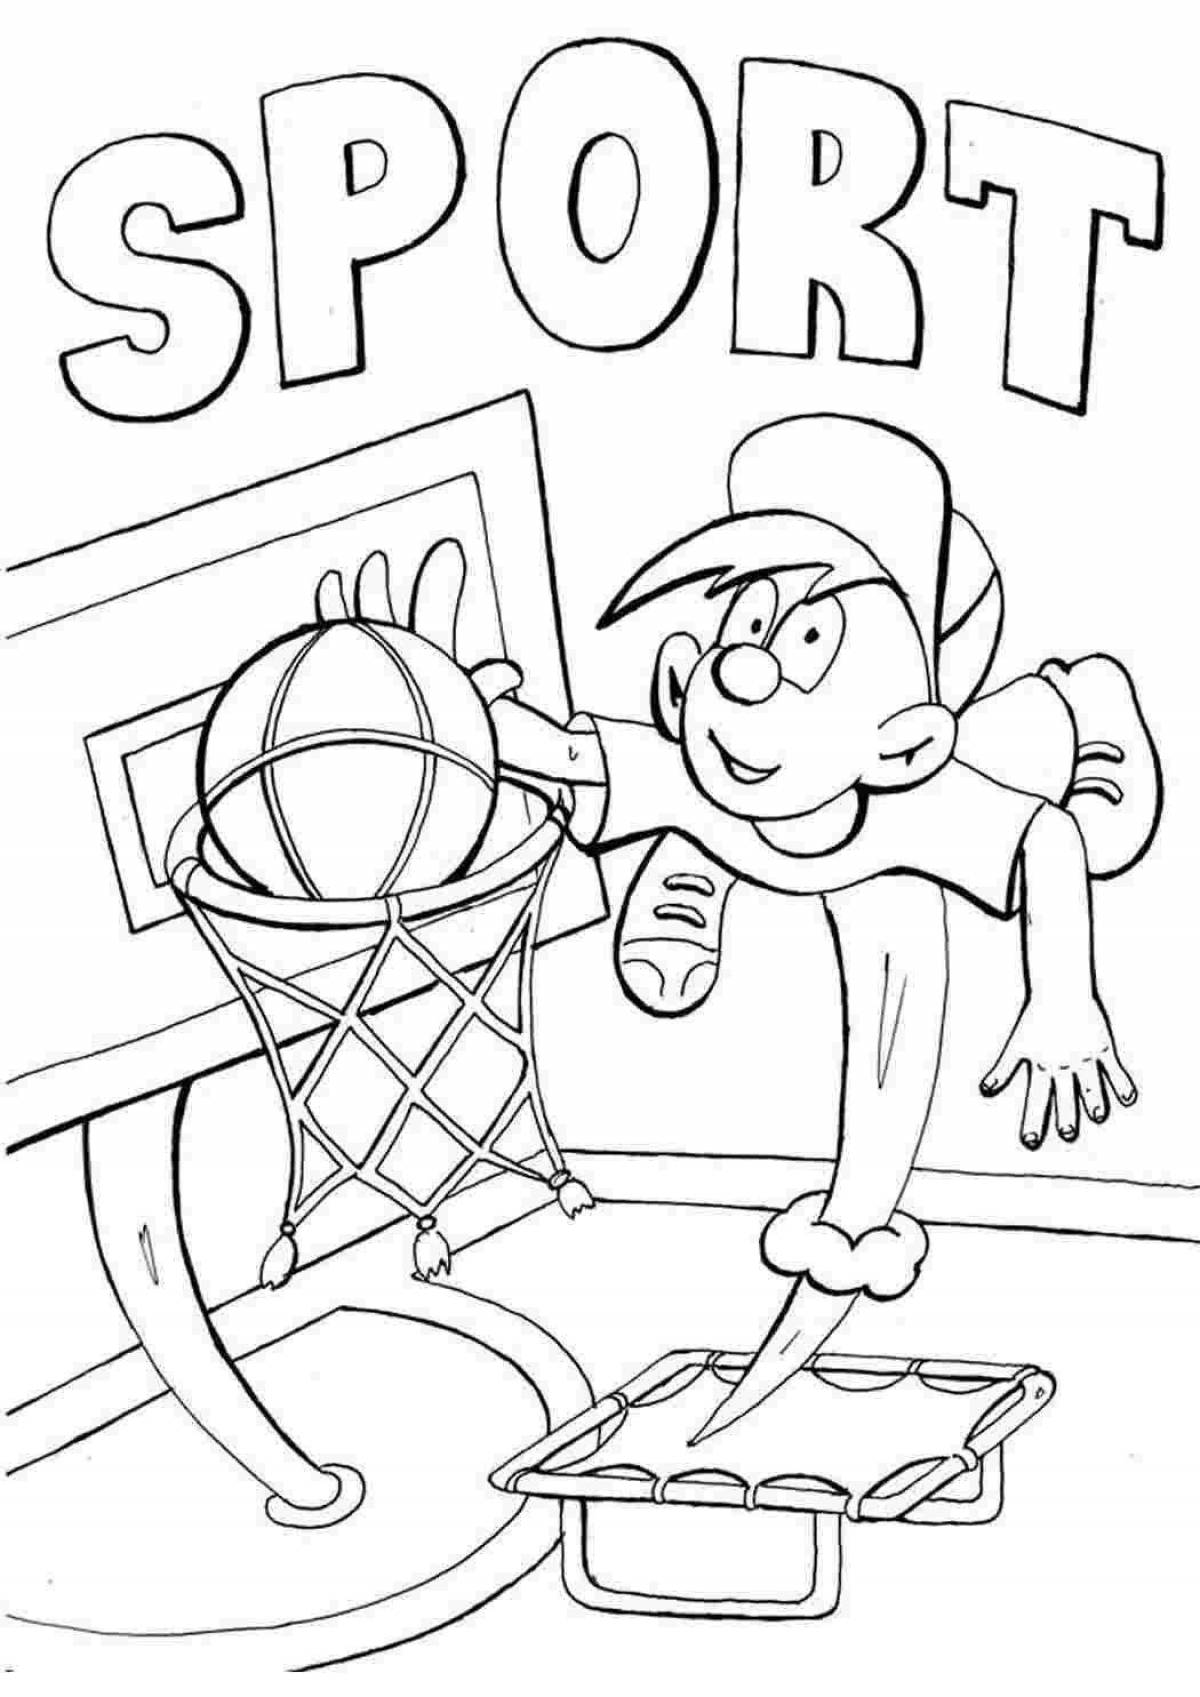 Exquisite coloring book health and sports